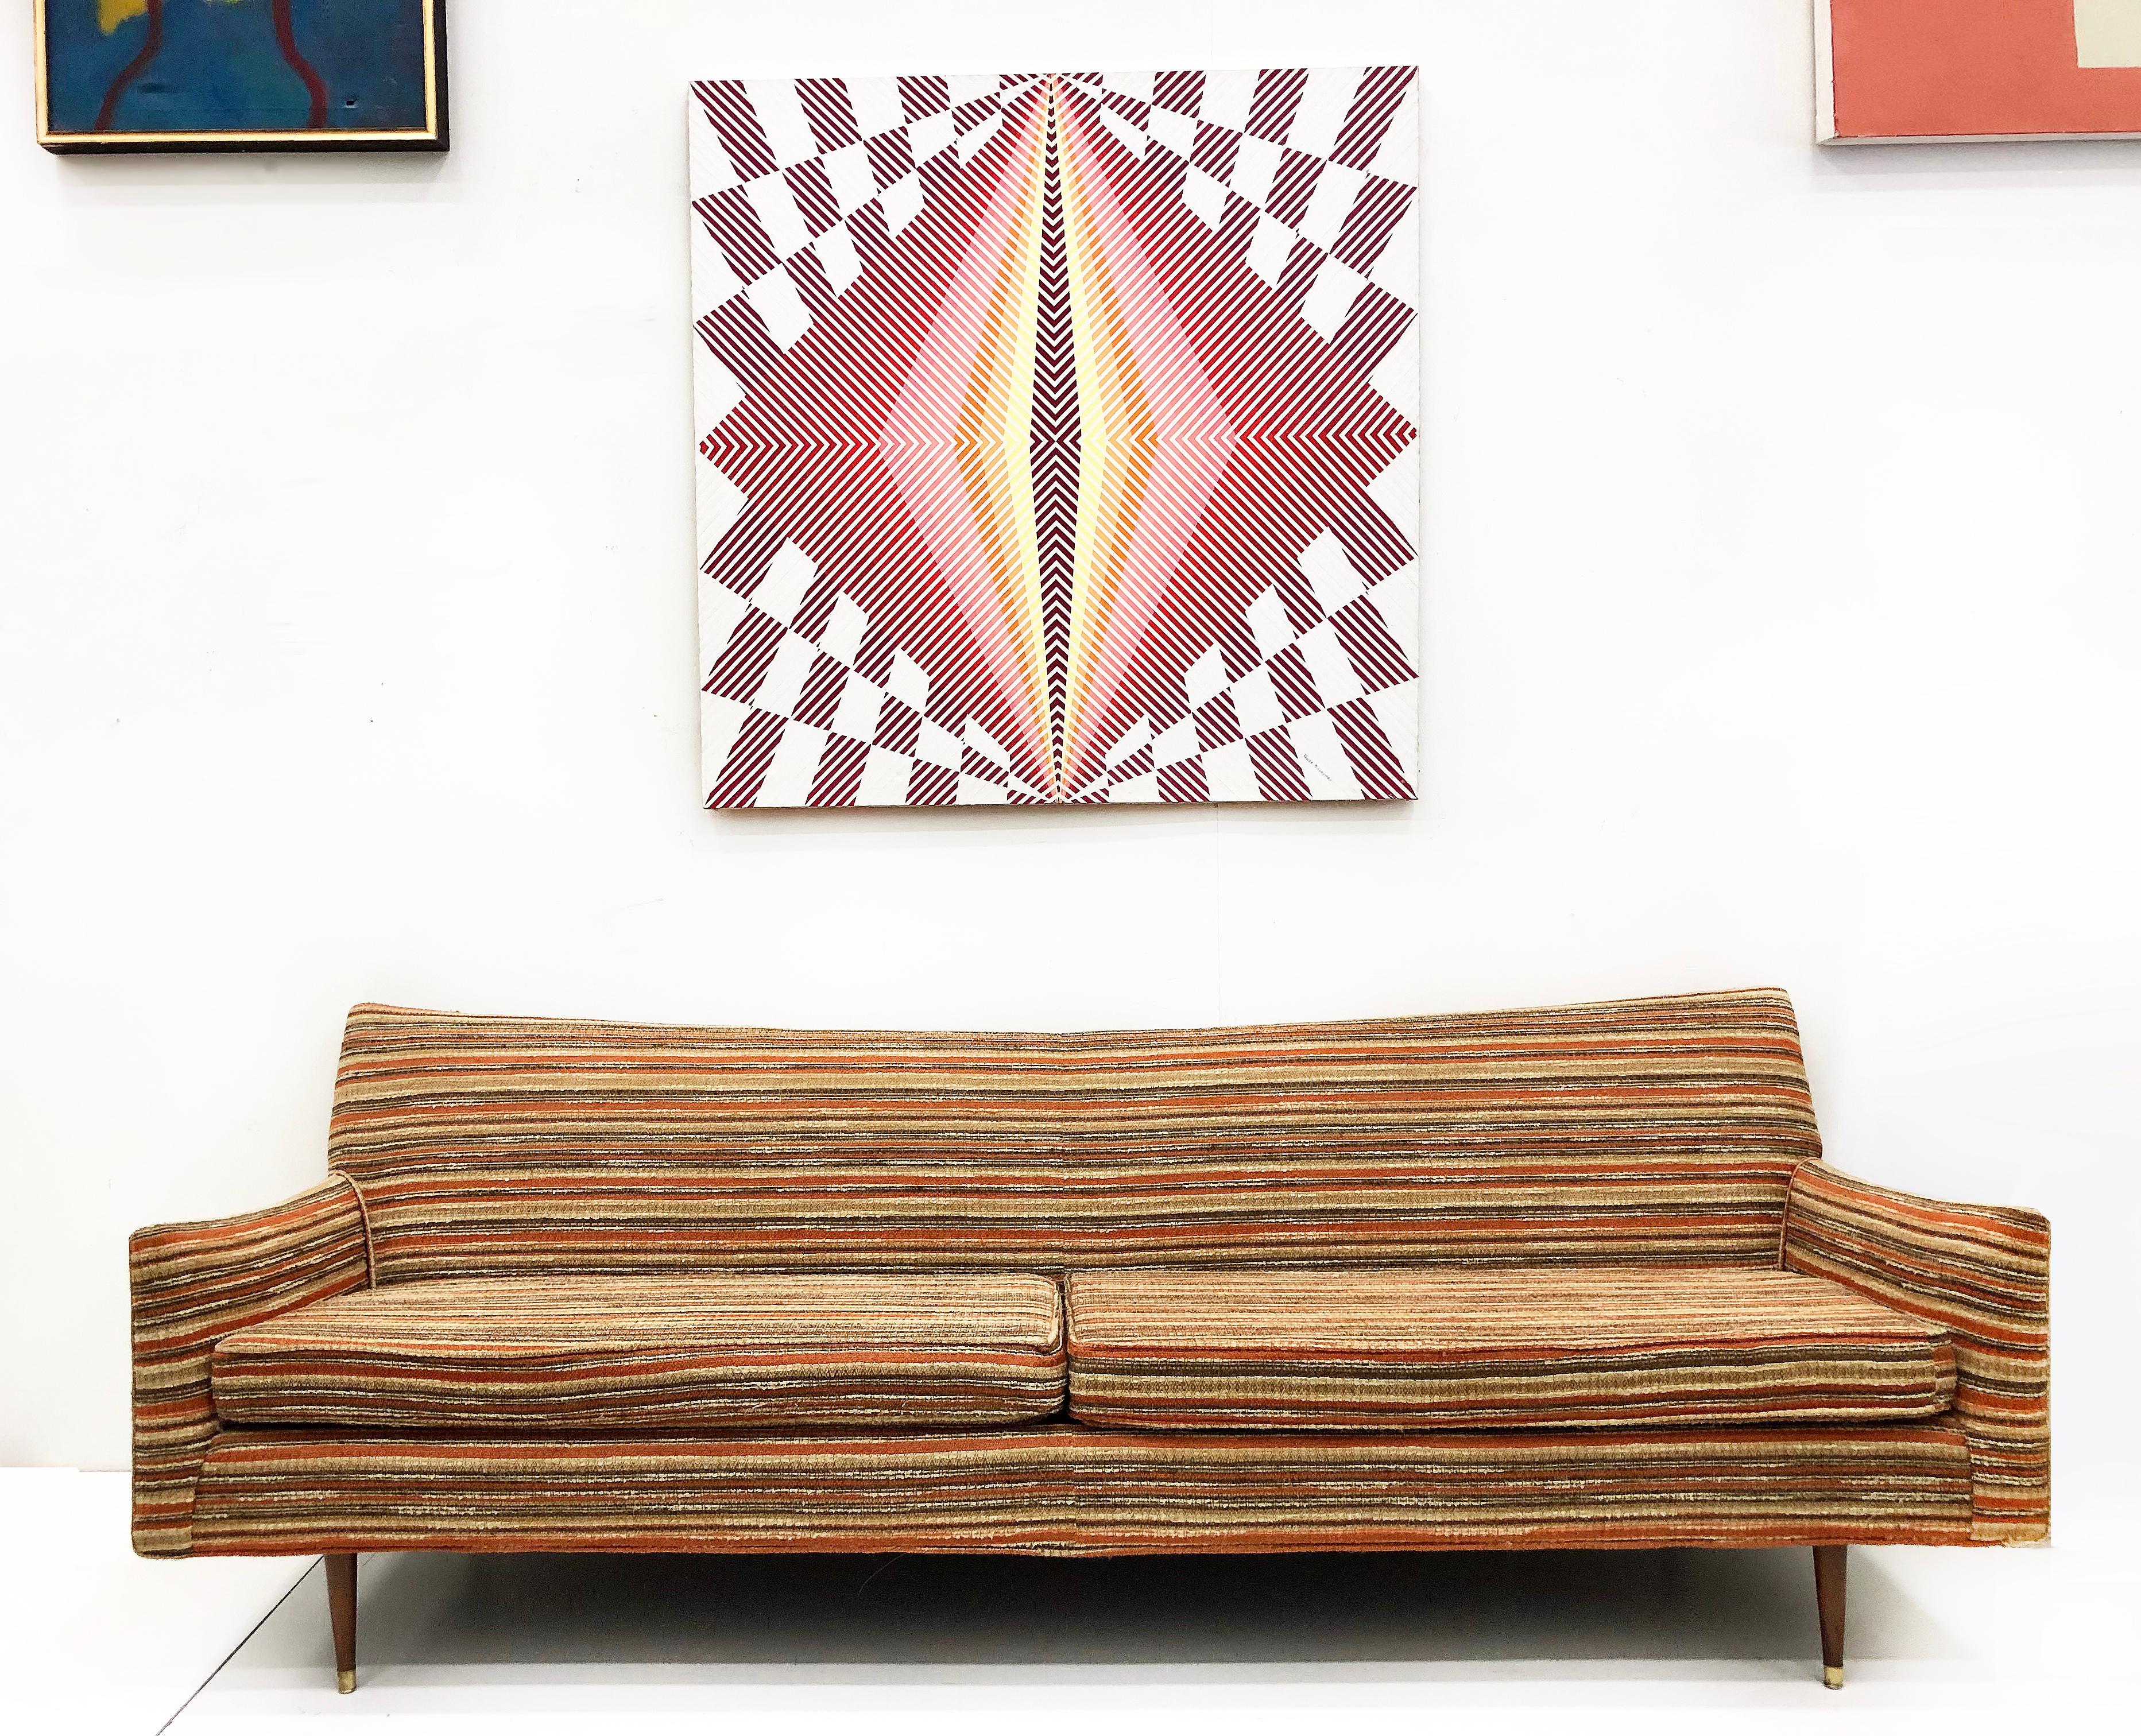 1950s Mid-Century Modern sofa after Paul McCobb, original fabric

Offered is a sleek Midcentury Modern sofa in the manner of Paul McCobb with the original fabric. The upholstery has a nice texture that resembles Missoni and the form of this Iconic